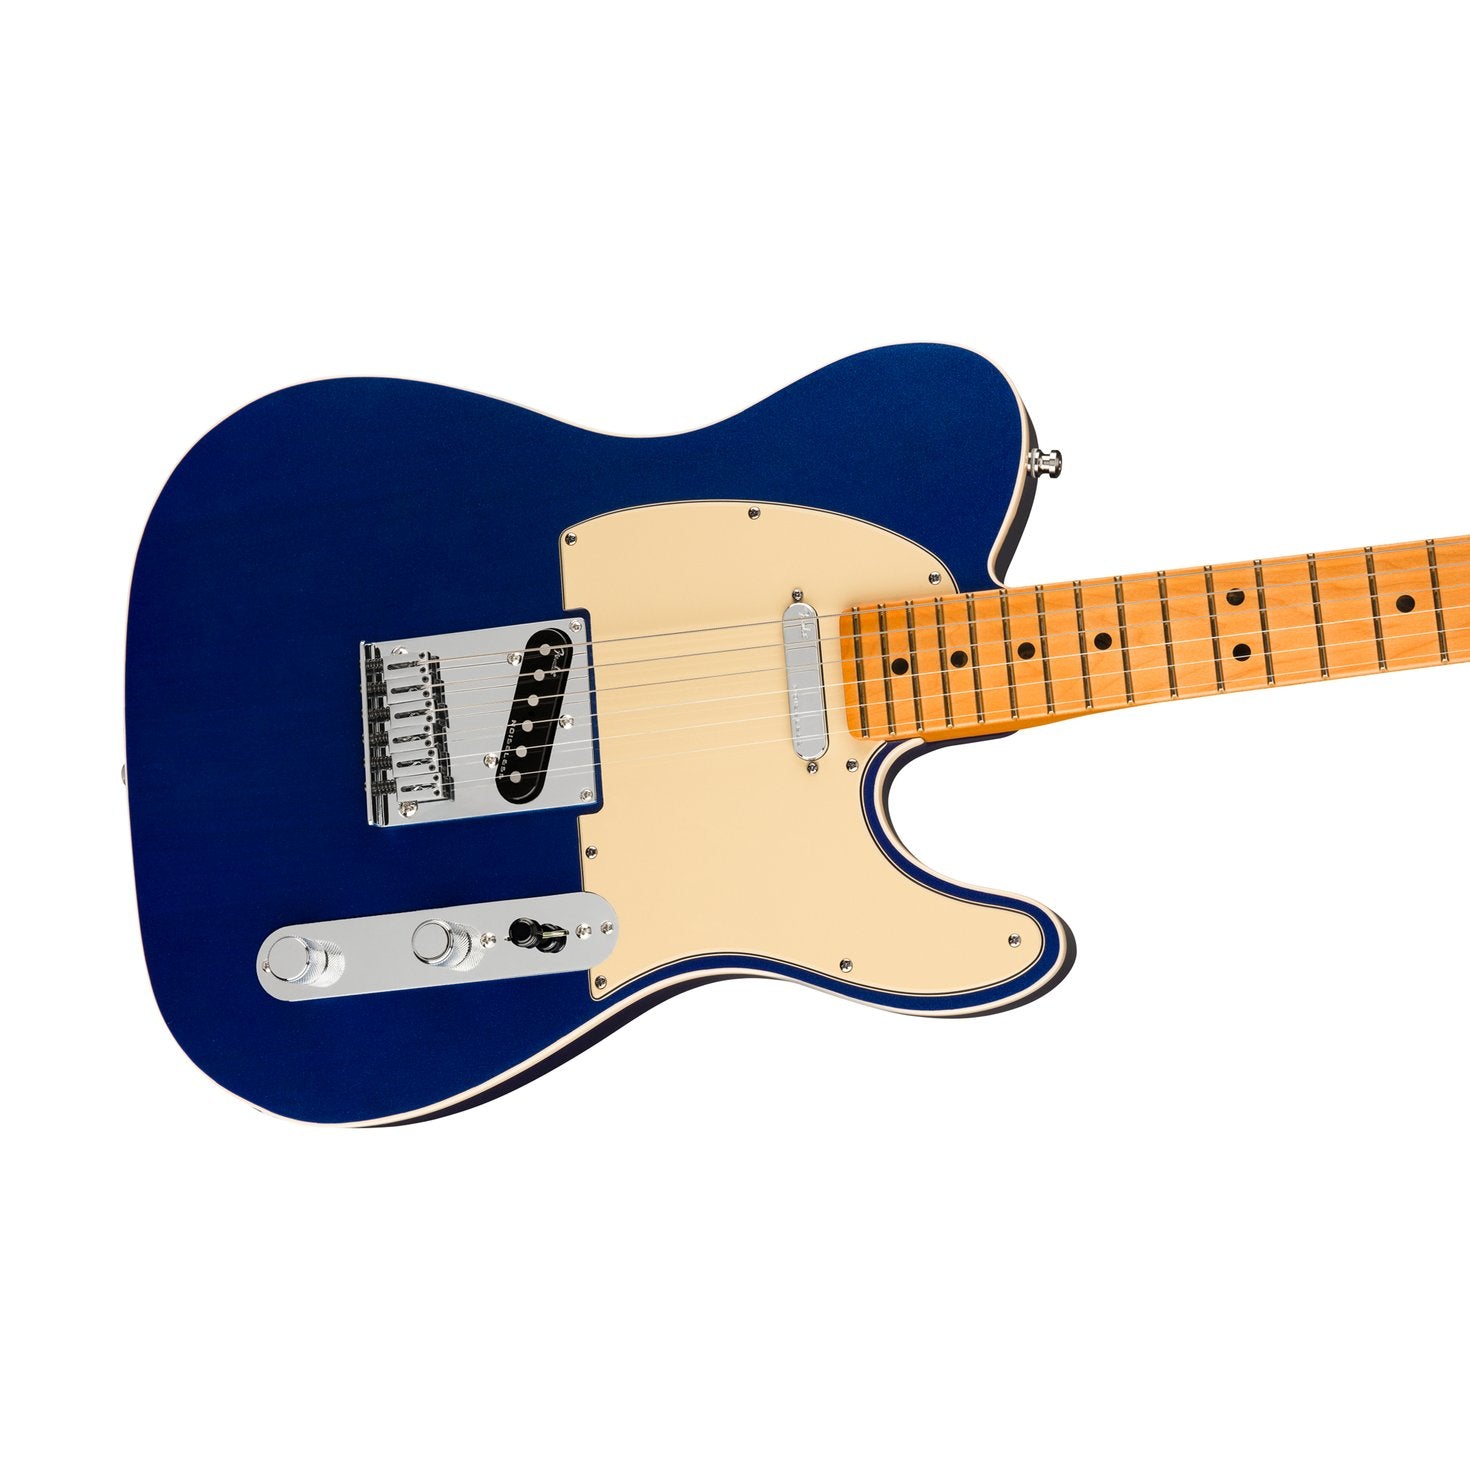 Fender American Ultra Telecaster Electric Guitar, Maple FB, Cobra Blue, FENDER, ELECTRIC GUITAR, fender-electric-guitar-f03-011-8032-795, ZOSO MUSIC SDN BHD